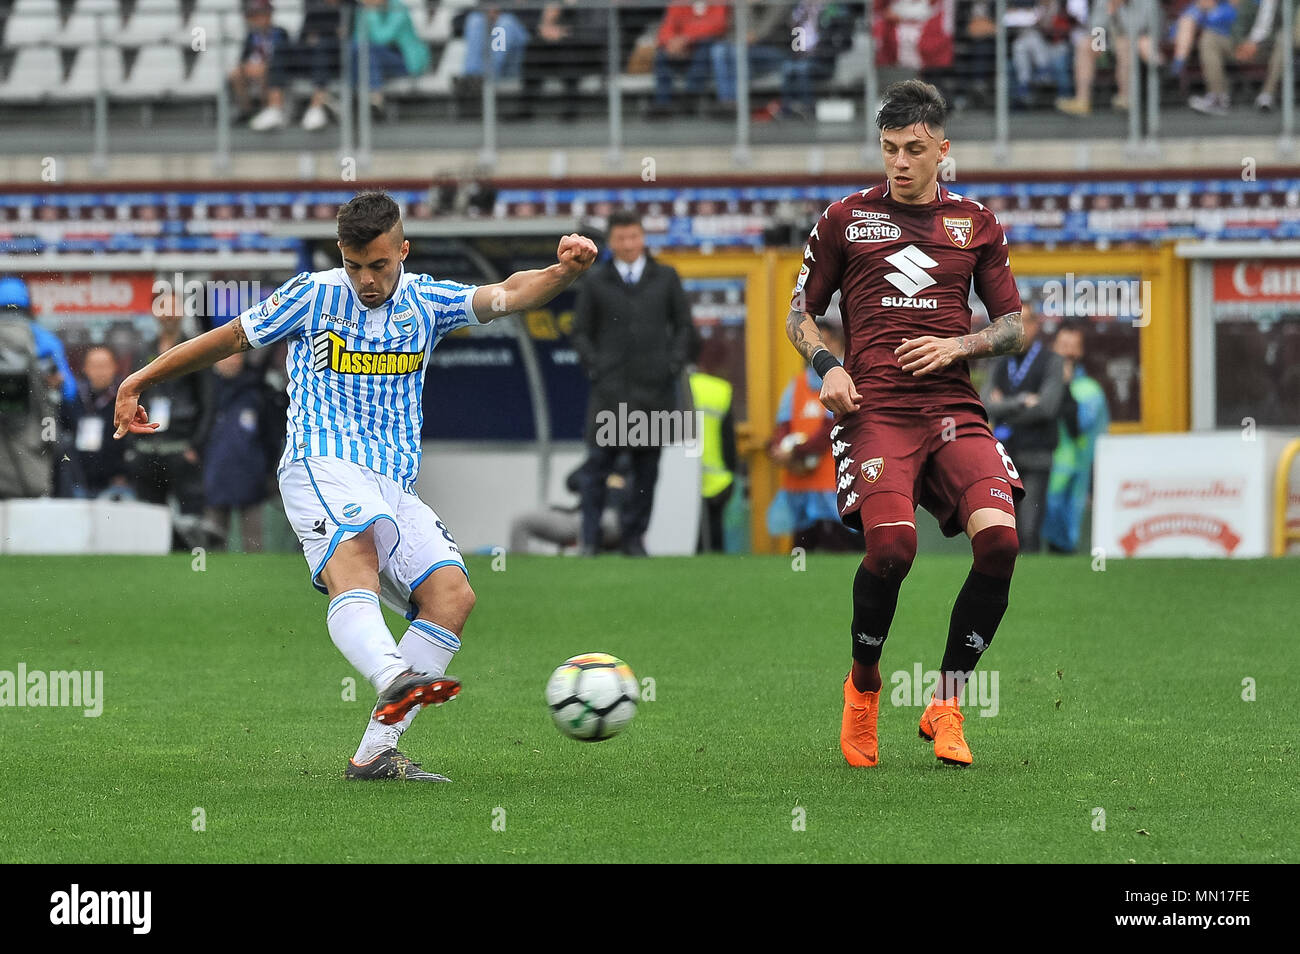 Torino Vs Spal High Resolution Stock Photography and Images - Alamy